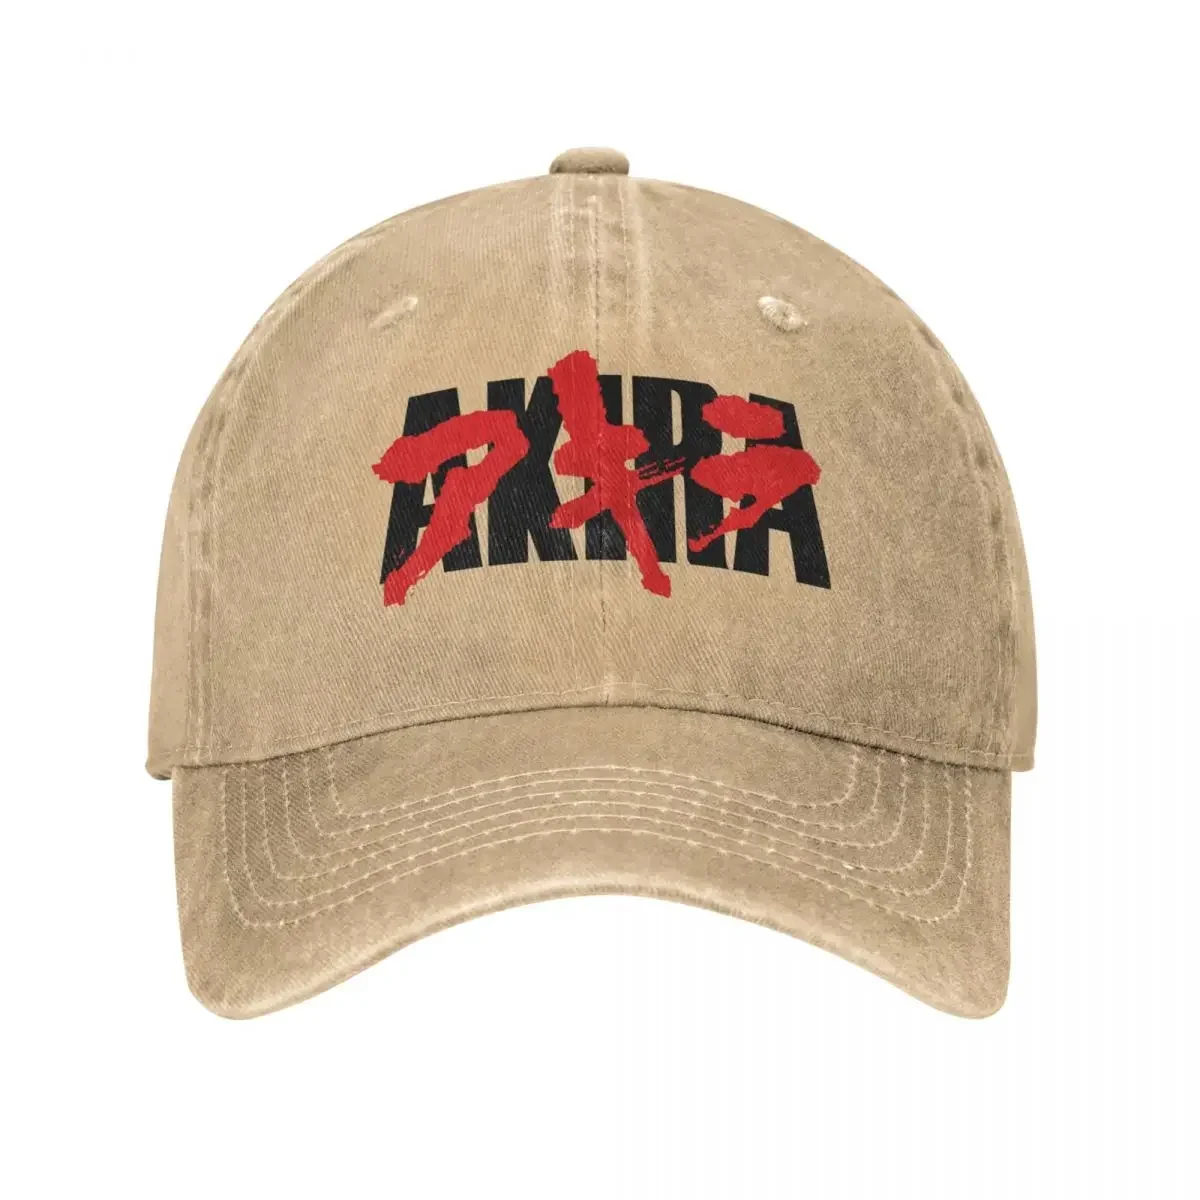 

Bloody Akira Logo Unisex Baseball Cap Anime Distressed Washed Hats Cap Retro Outdoor Activities Unstructured Soft Headwear